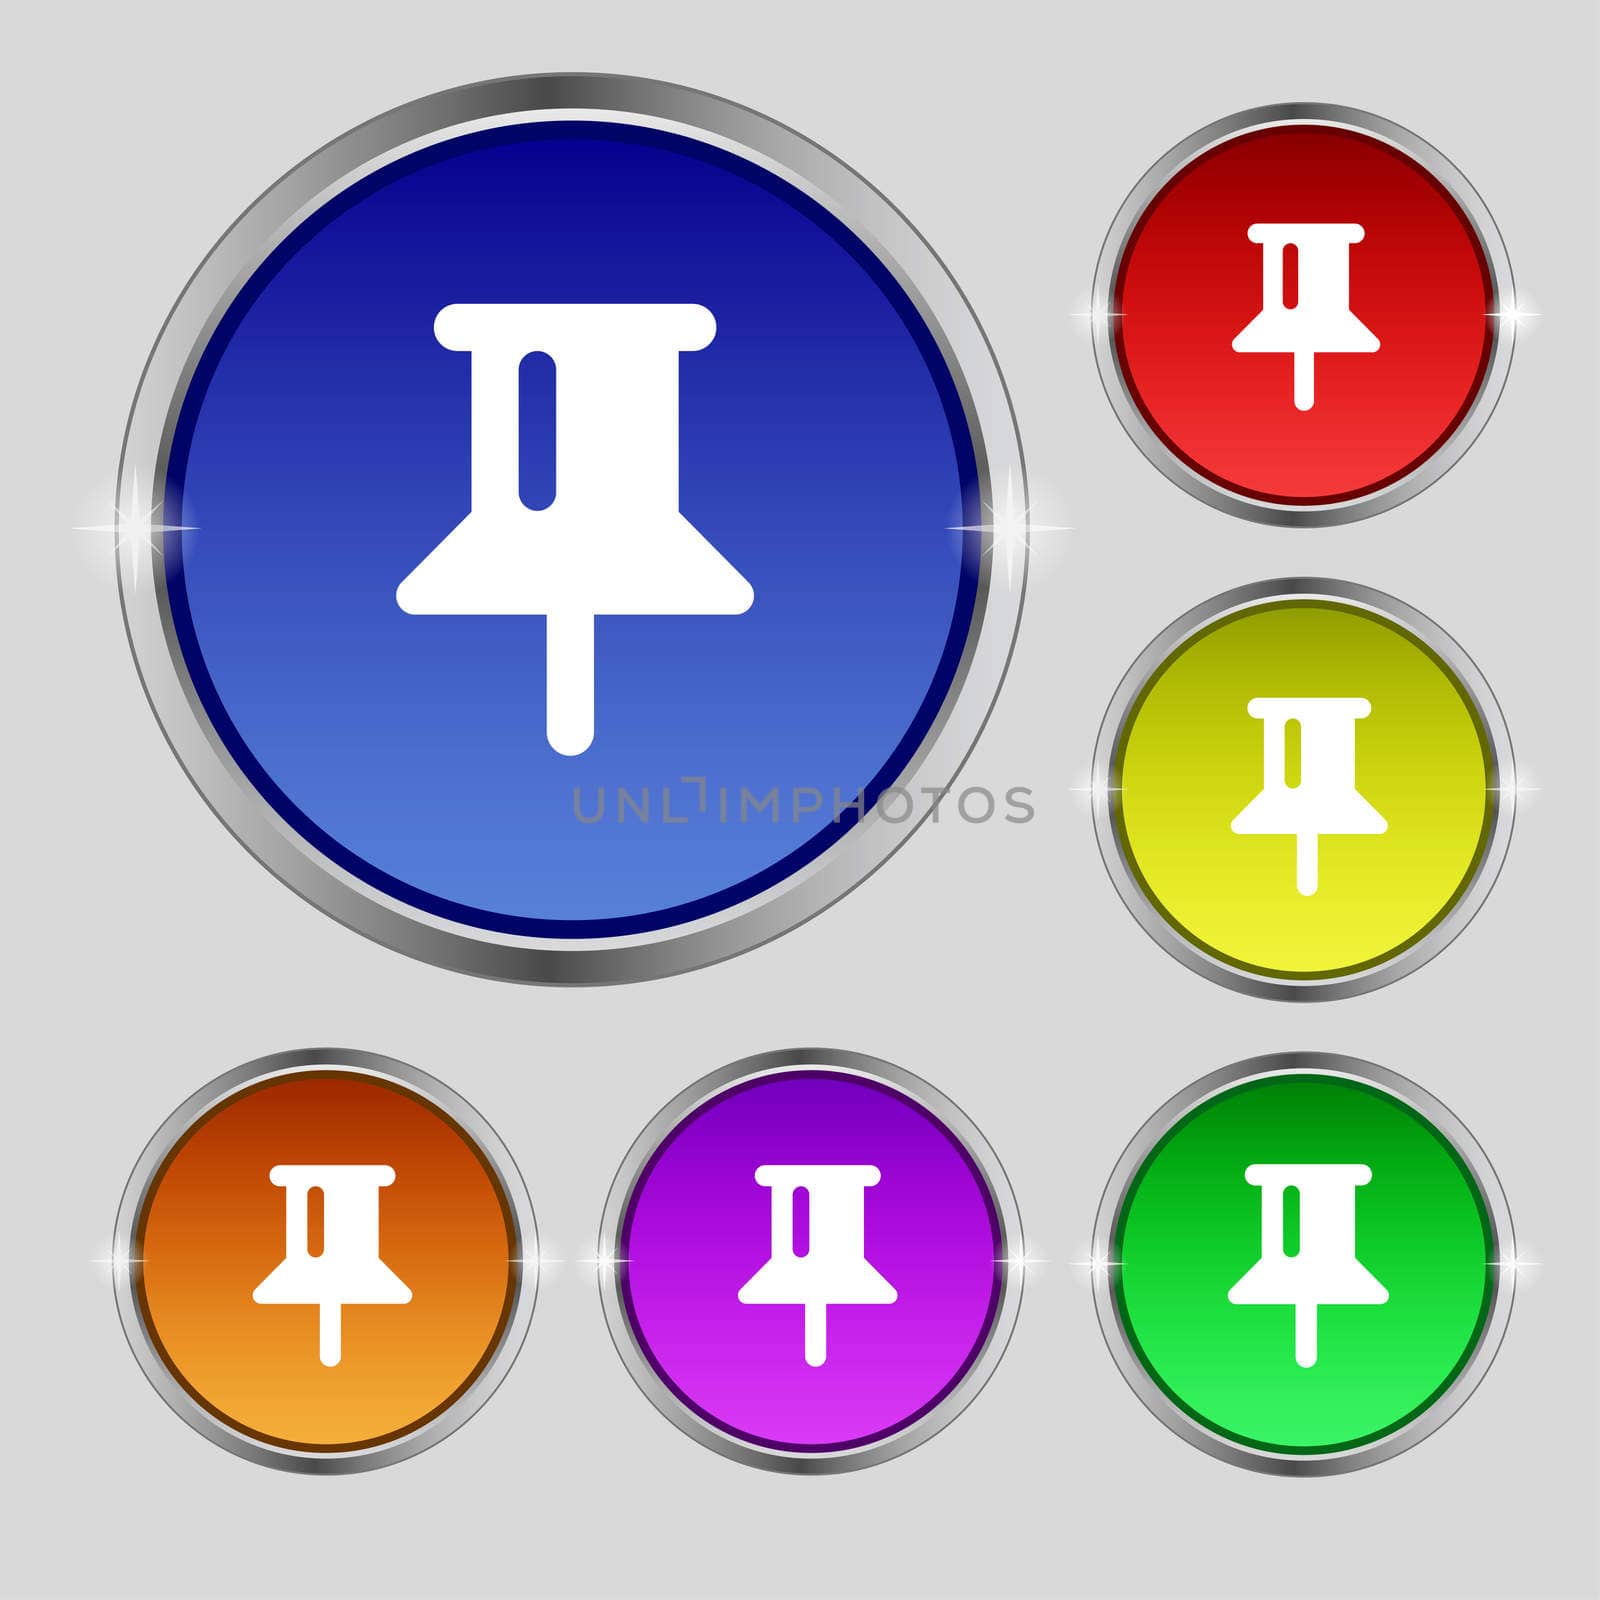 Map pointer, GPS location icon sign. Round symbol on bright colourful buttons. illustration